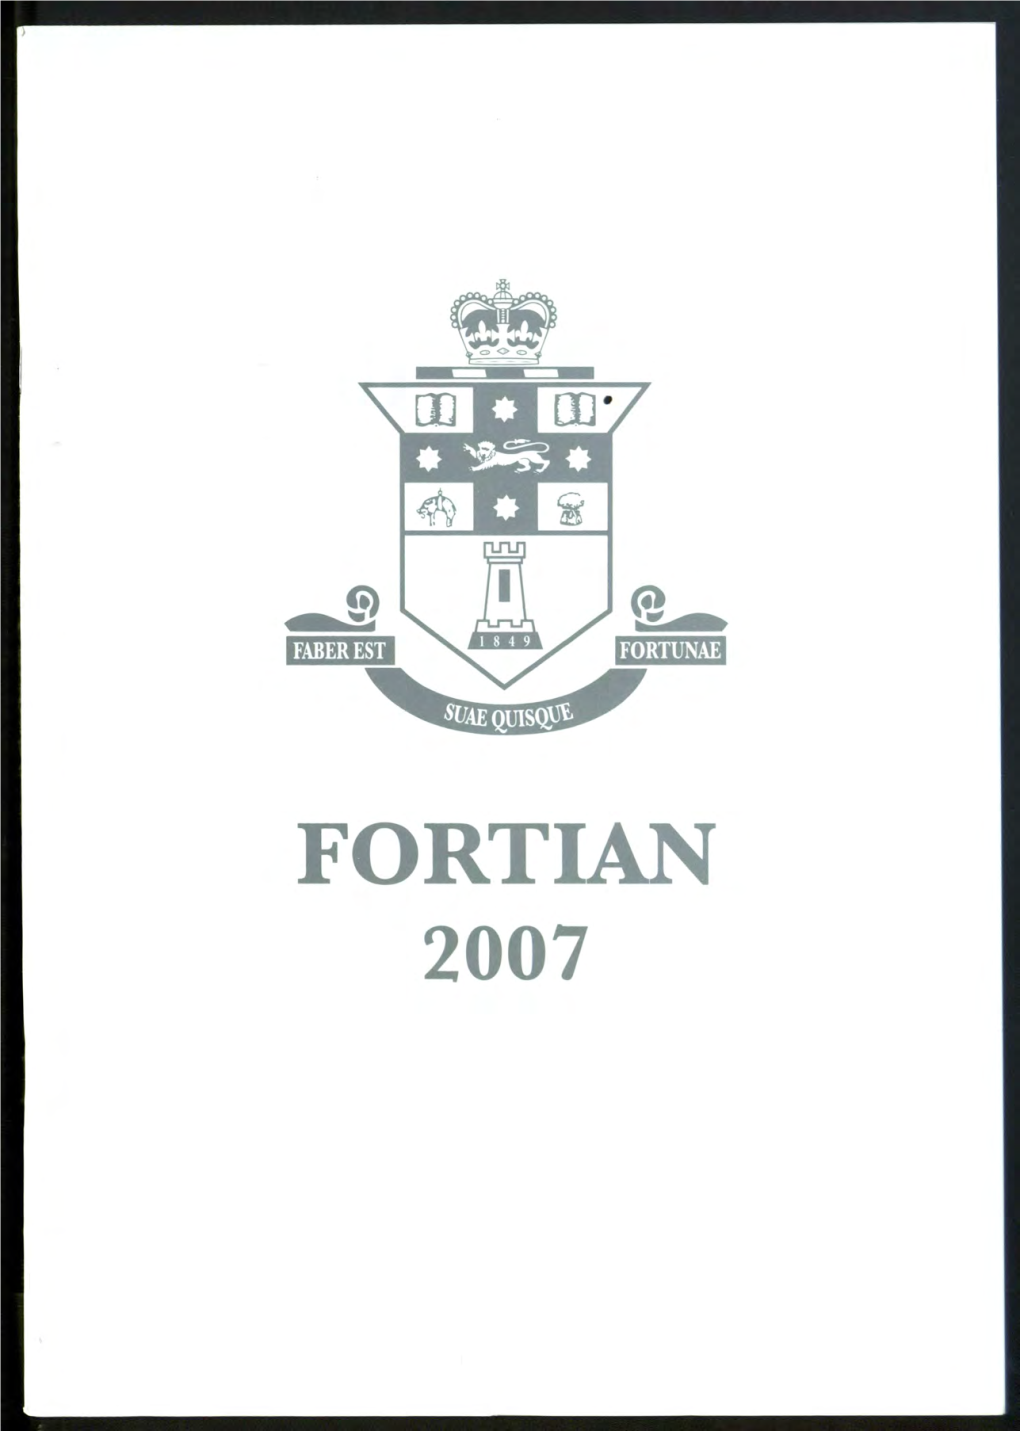 The Fortian 2007